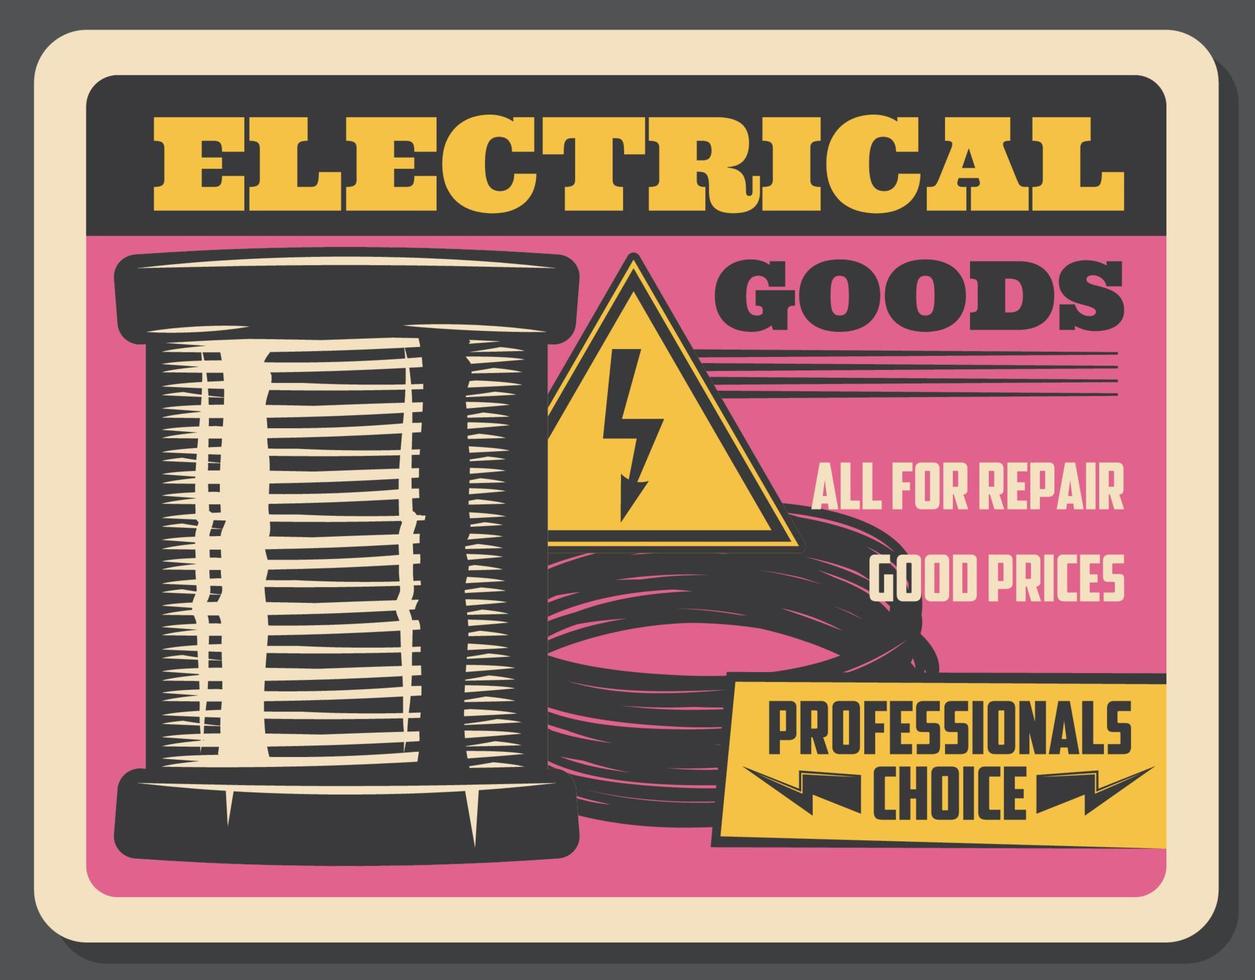 Electricity and electrical goods store, vector